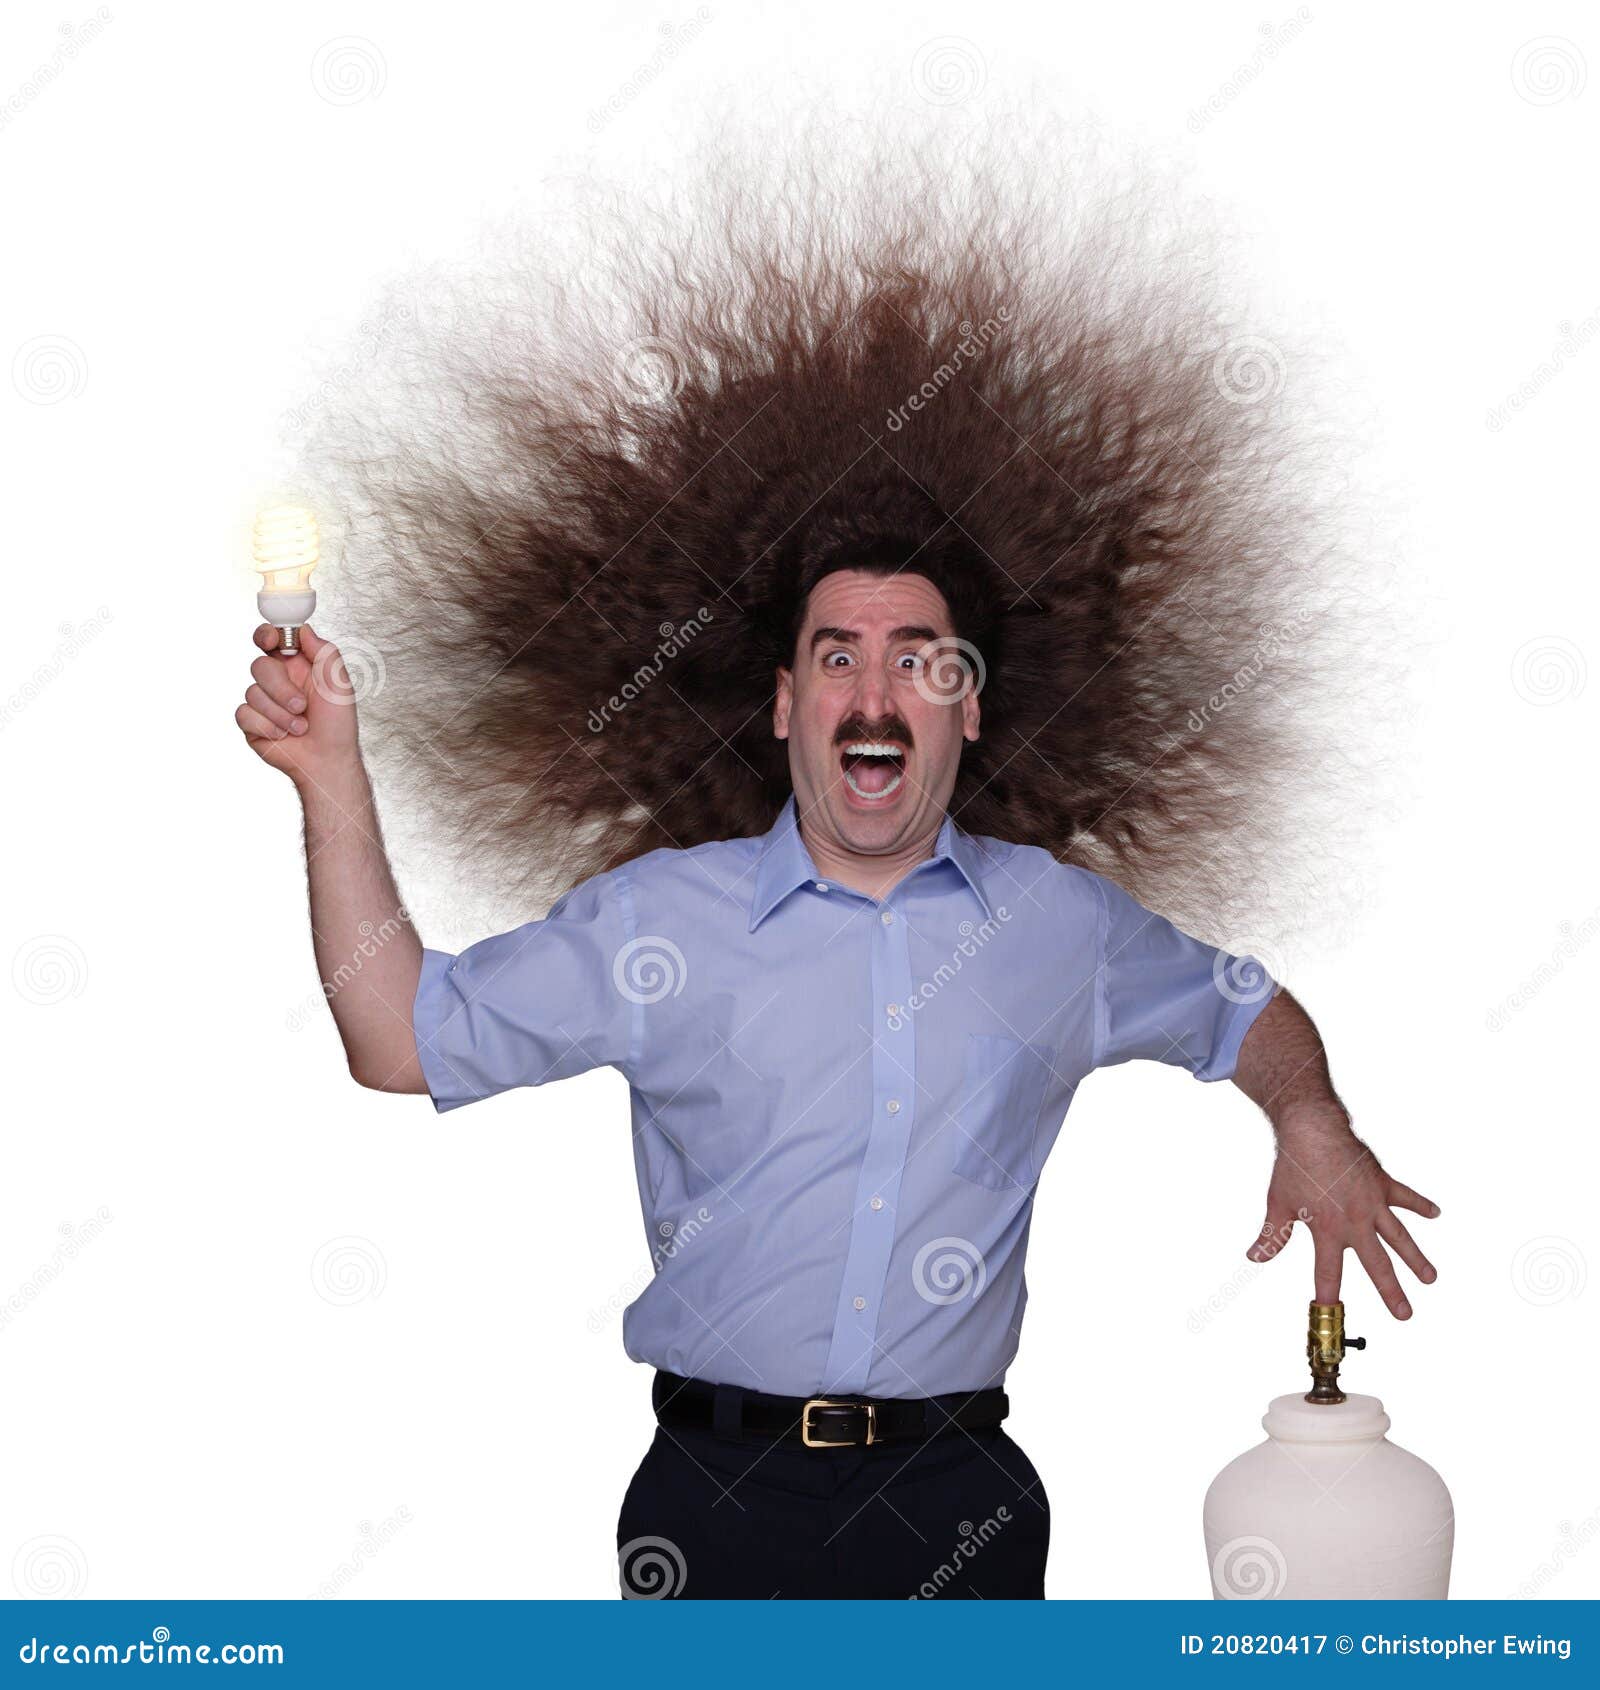 long-haired-man-being-electrocuted-1-20820417.jpg